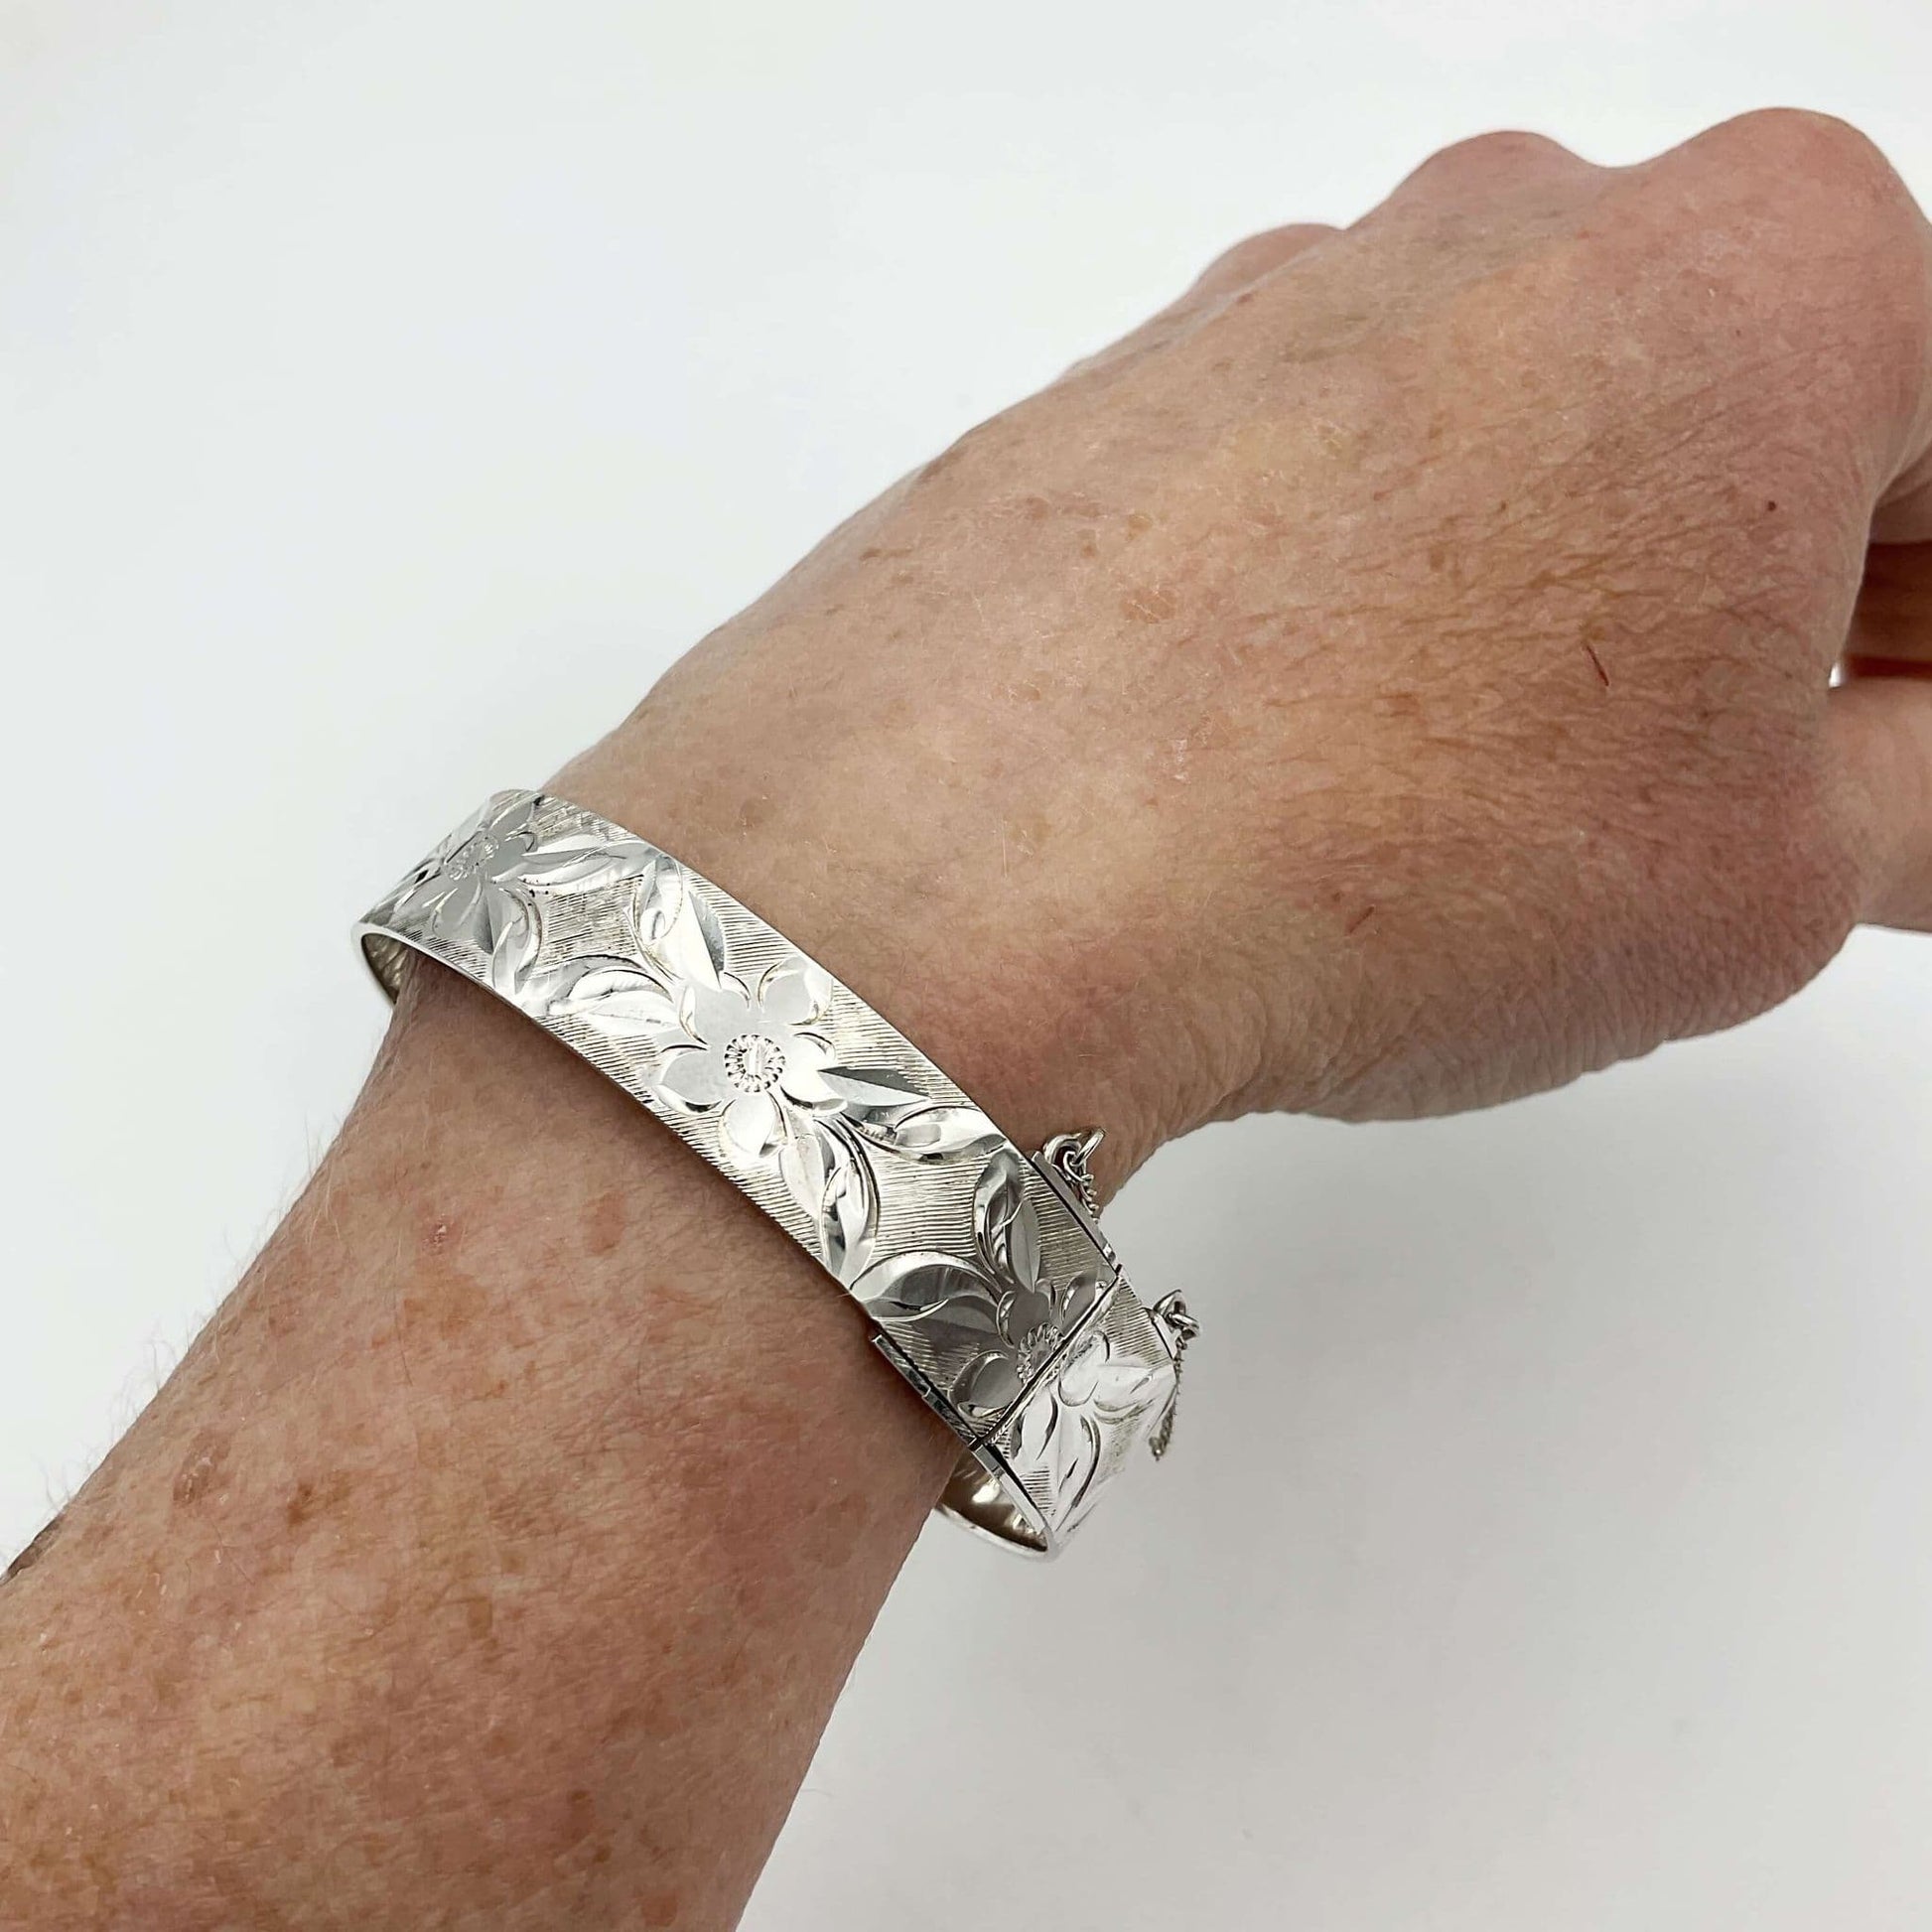 Silver bracelet with engraved flowers on a wrist